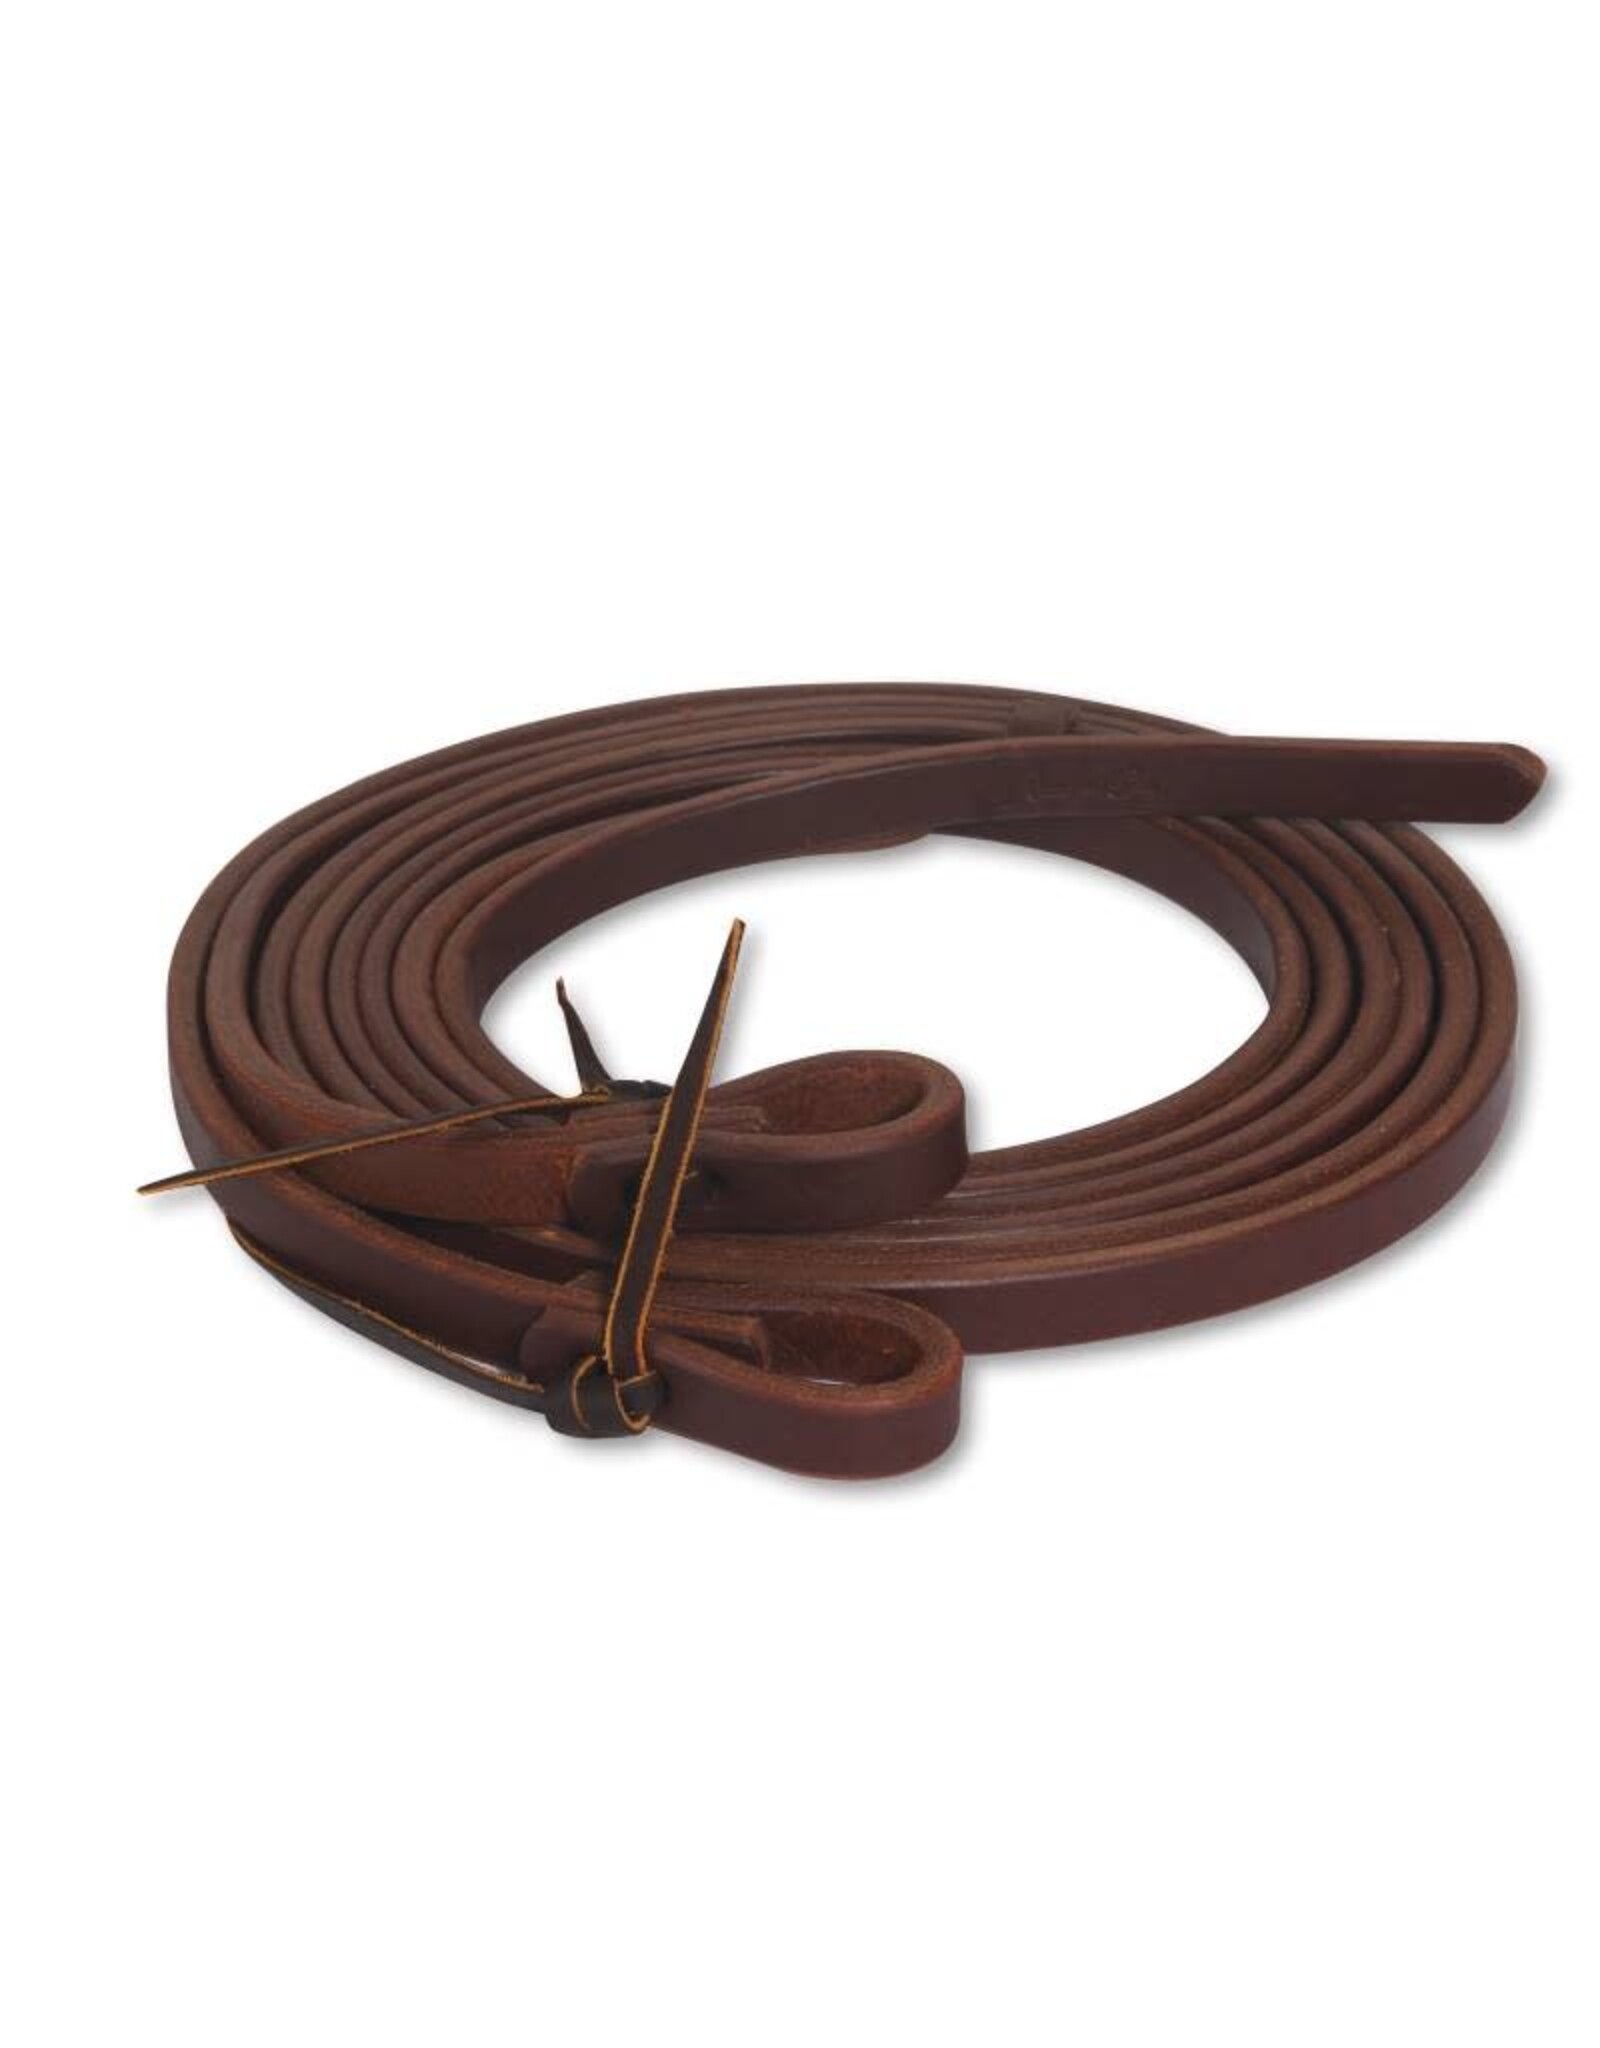 Professionals Choice Ranch Heavy Oil Harness Leather Split Reins 7'